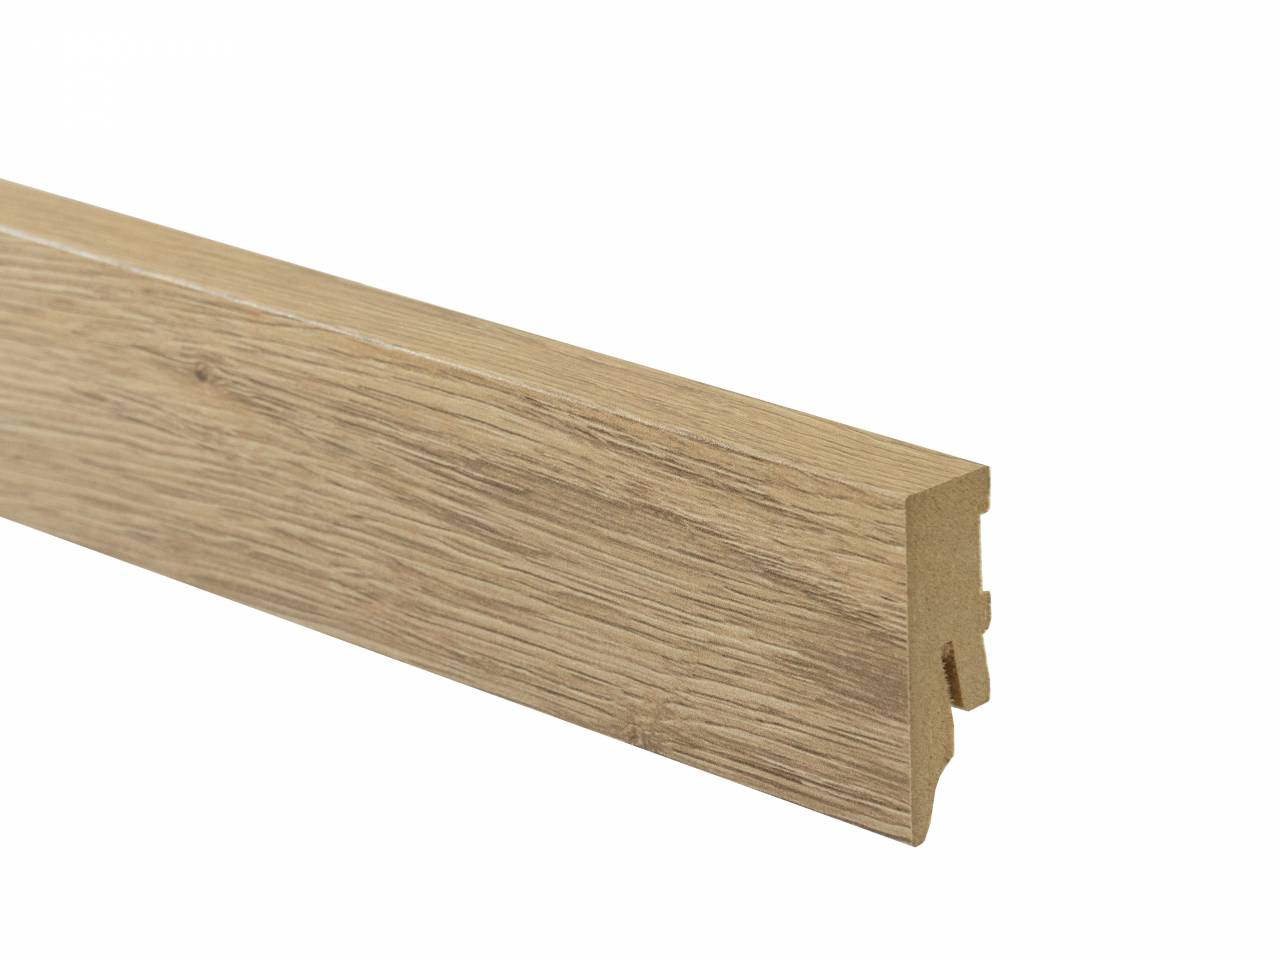 MDF wood floor sill suitable for laminate flooring in yellow colour. Length 2.6 m.